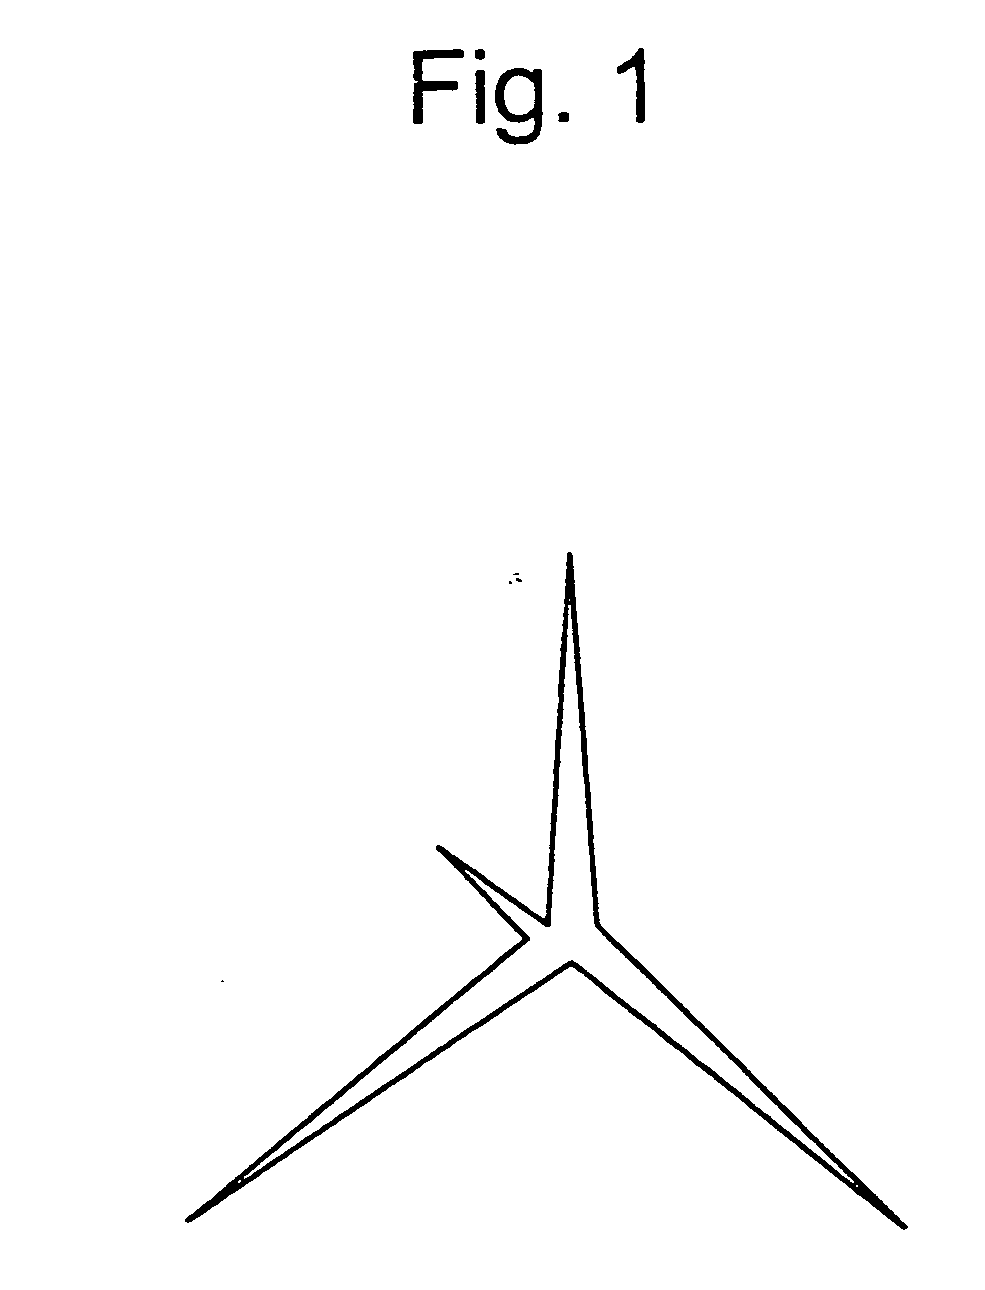 Needle-like single-crystal inorganic powder-containing powder material, coating composition, powder dispersion, and method of using the same